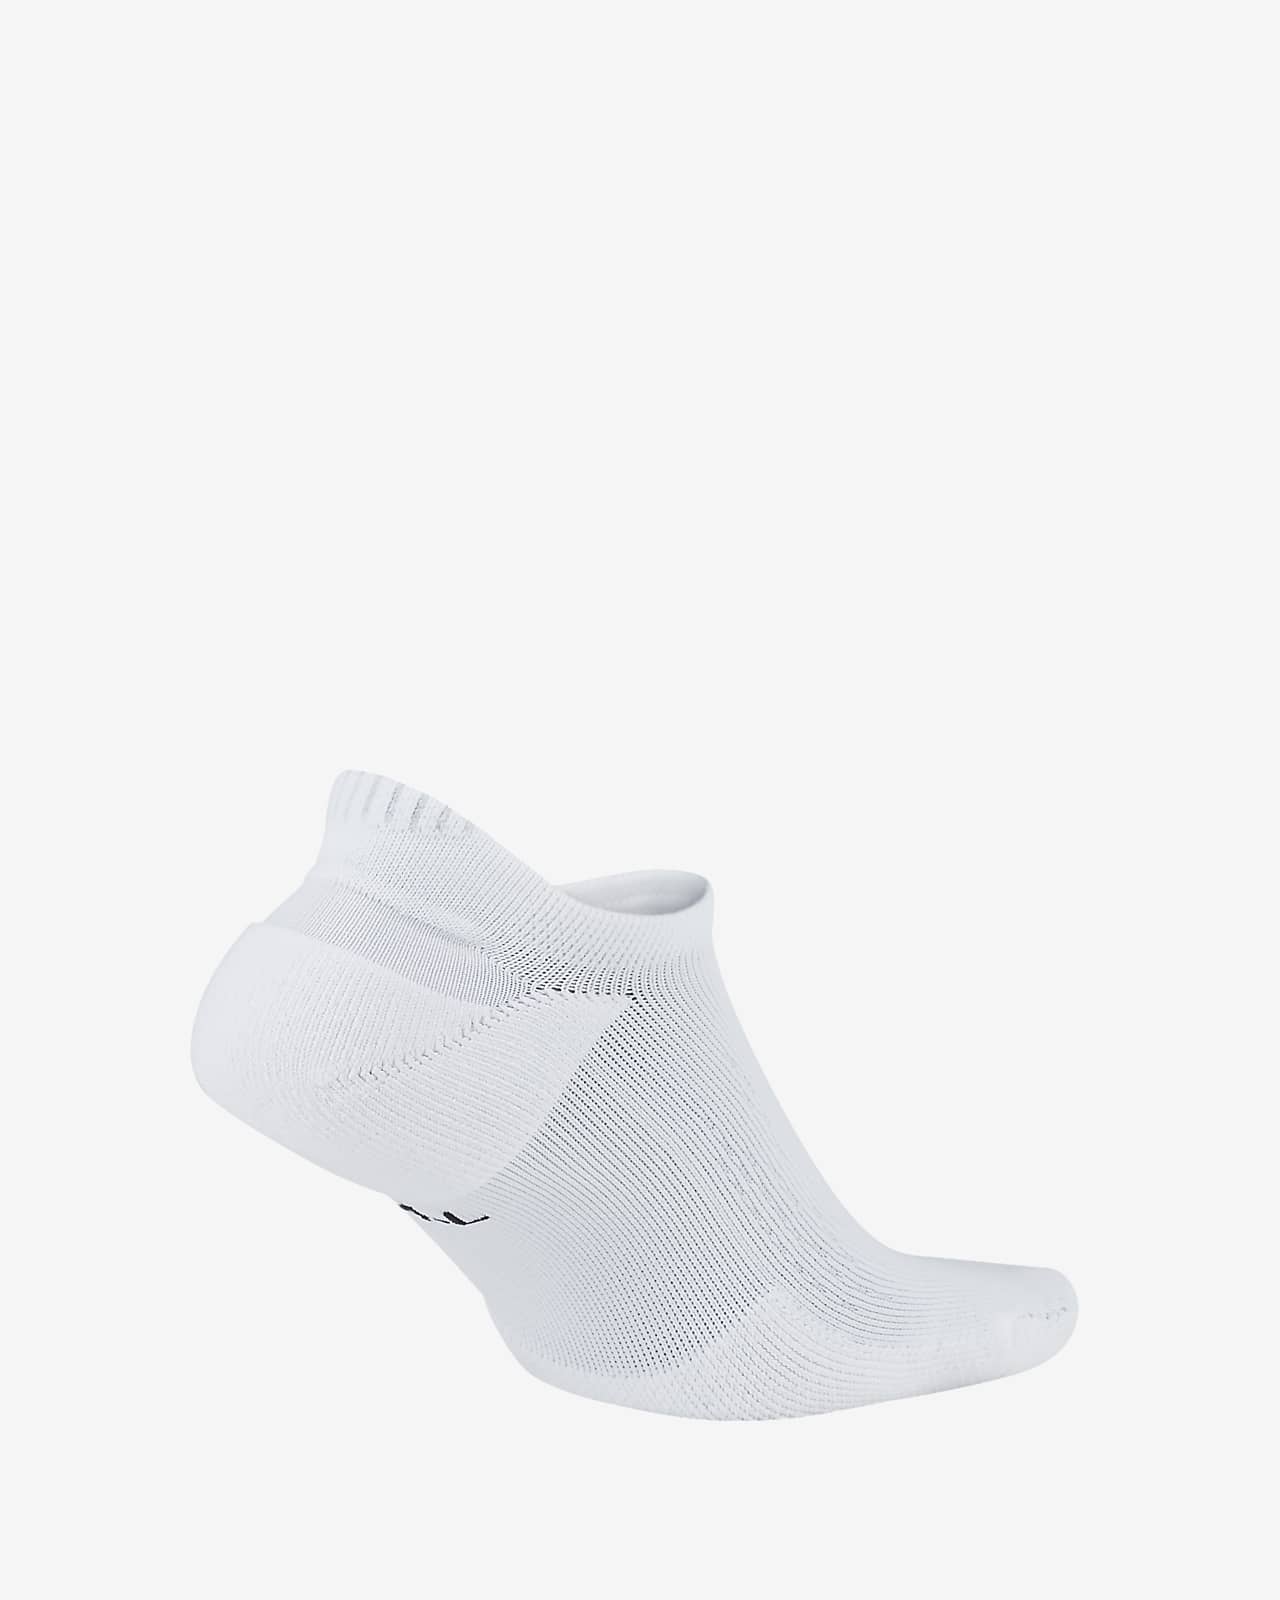 nike socks with shoes